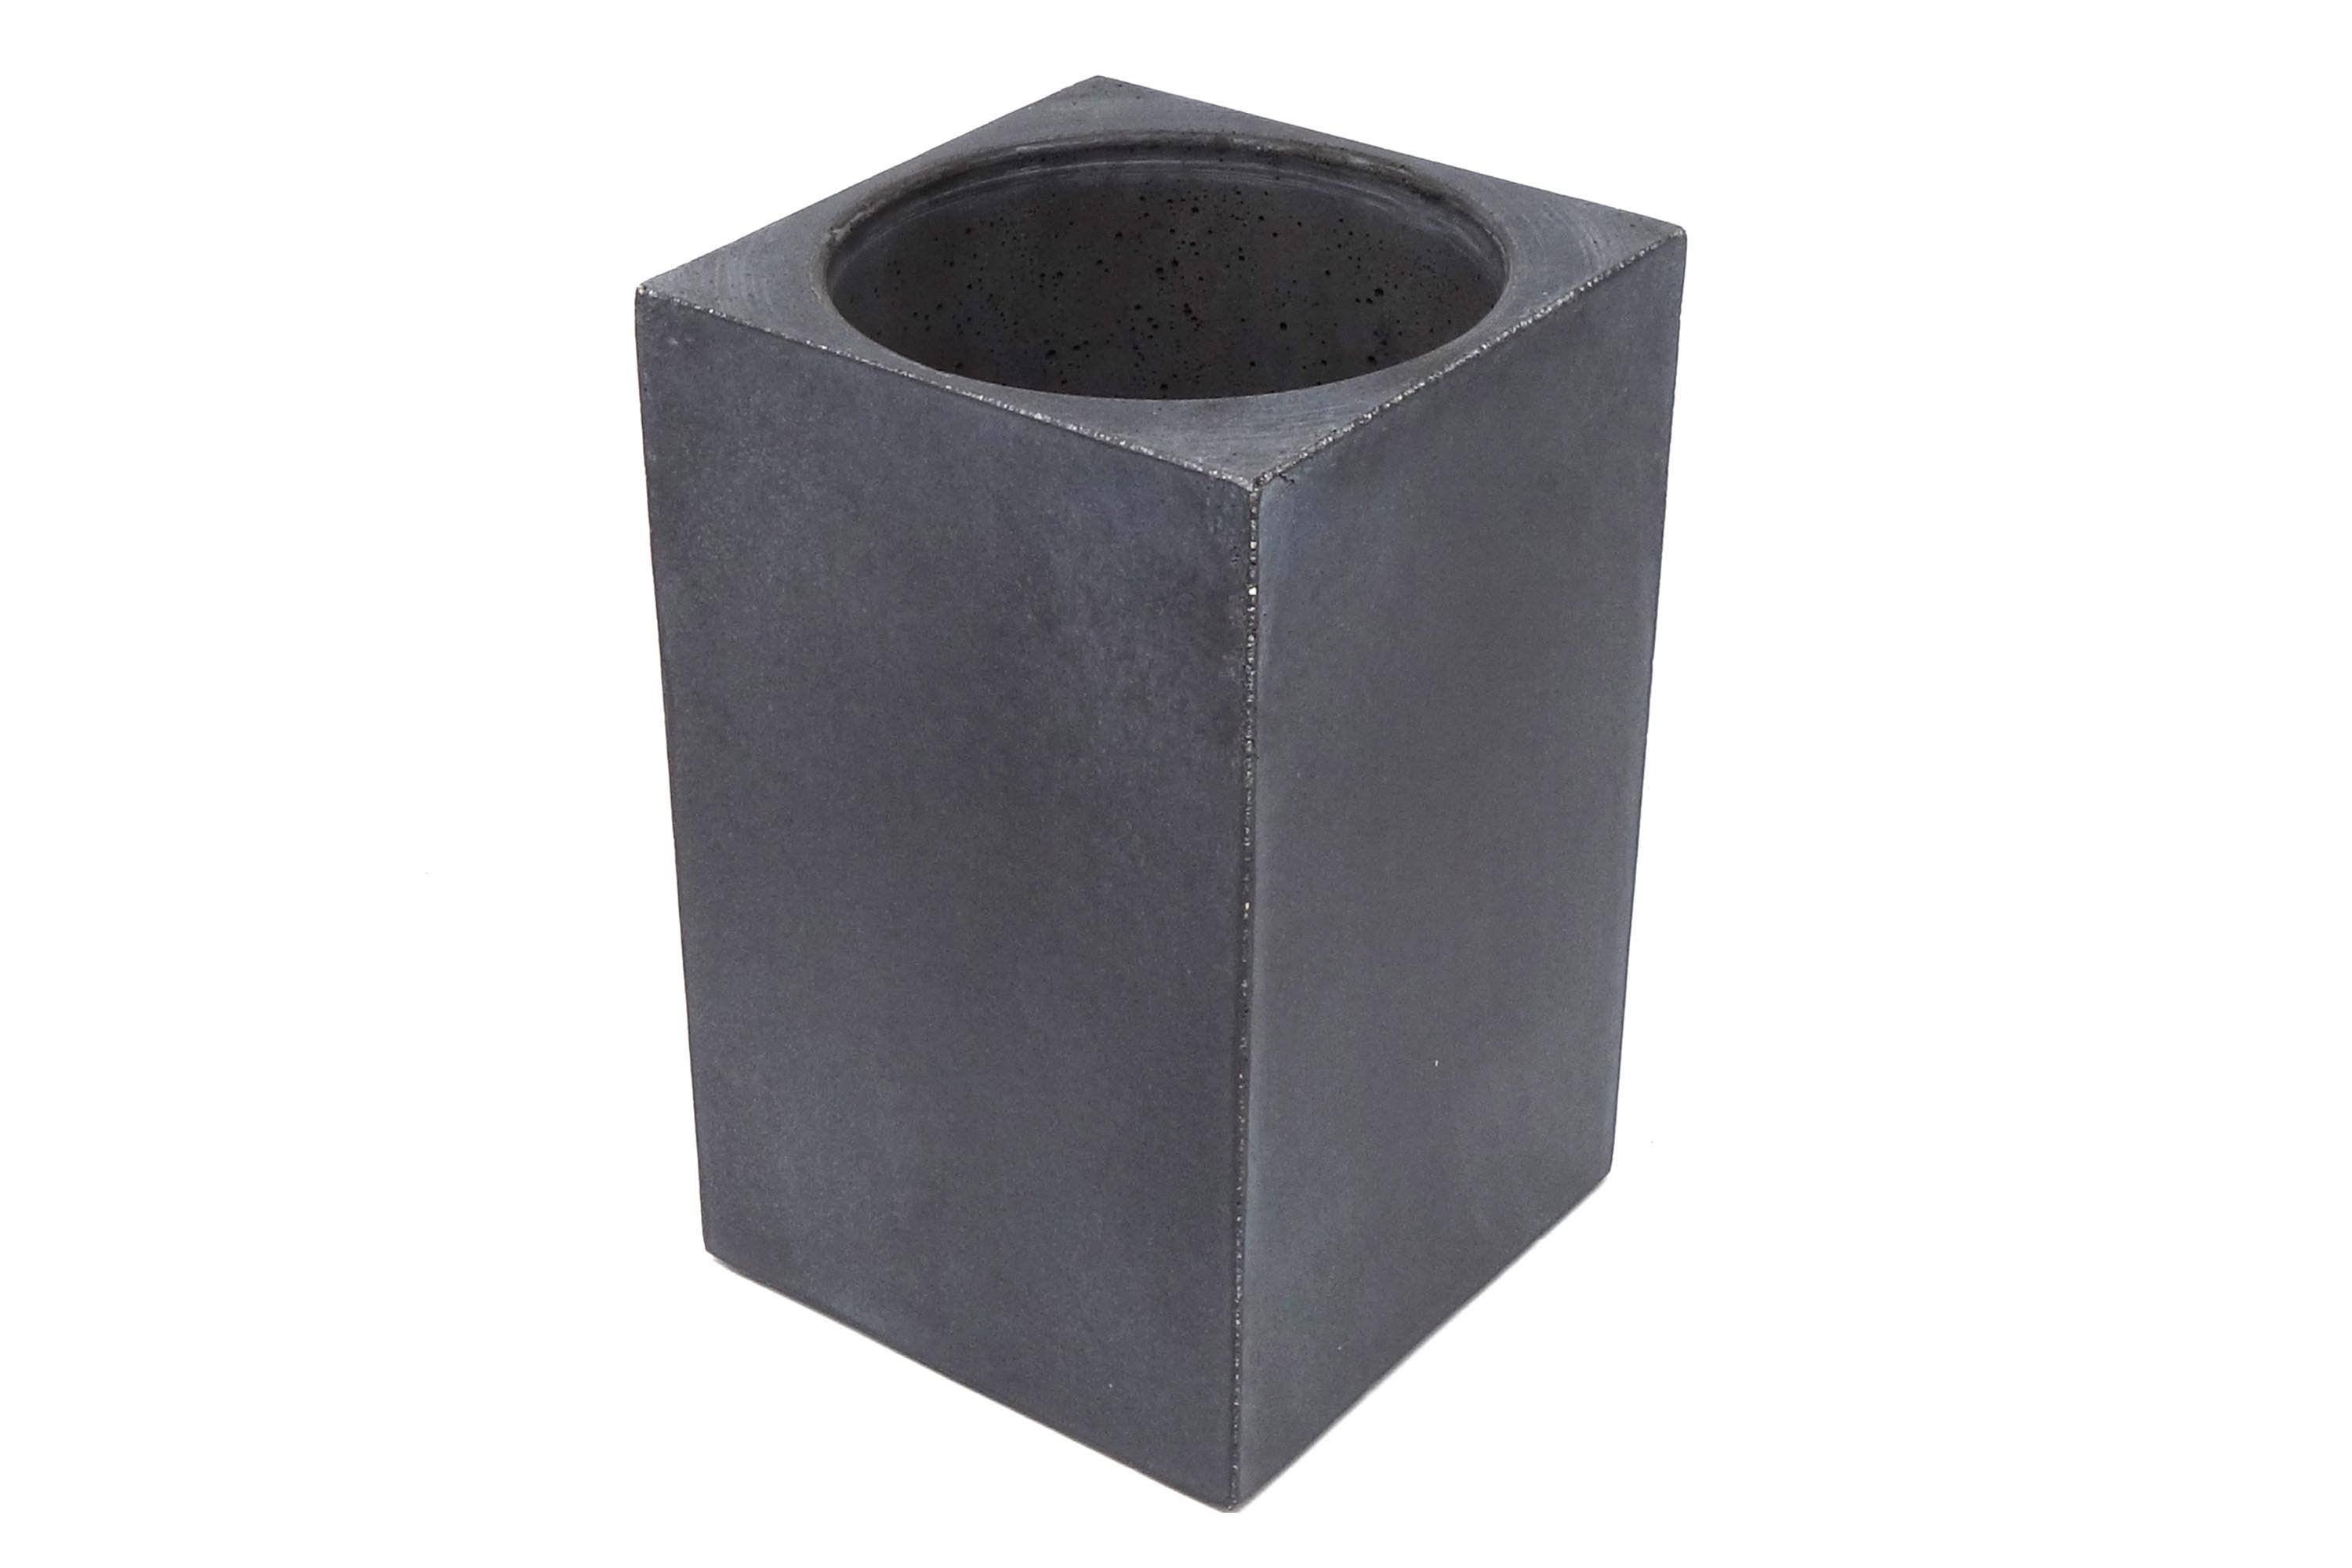 https://www.earlywooddesigns.com/cdn/shop/products/utensil_caddy_-_gray_concrete_holder_by_Earlywood.jpg?v=1581197136